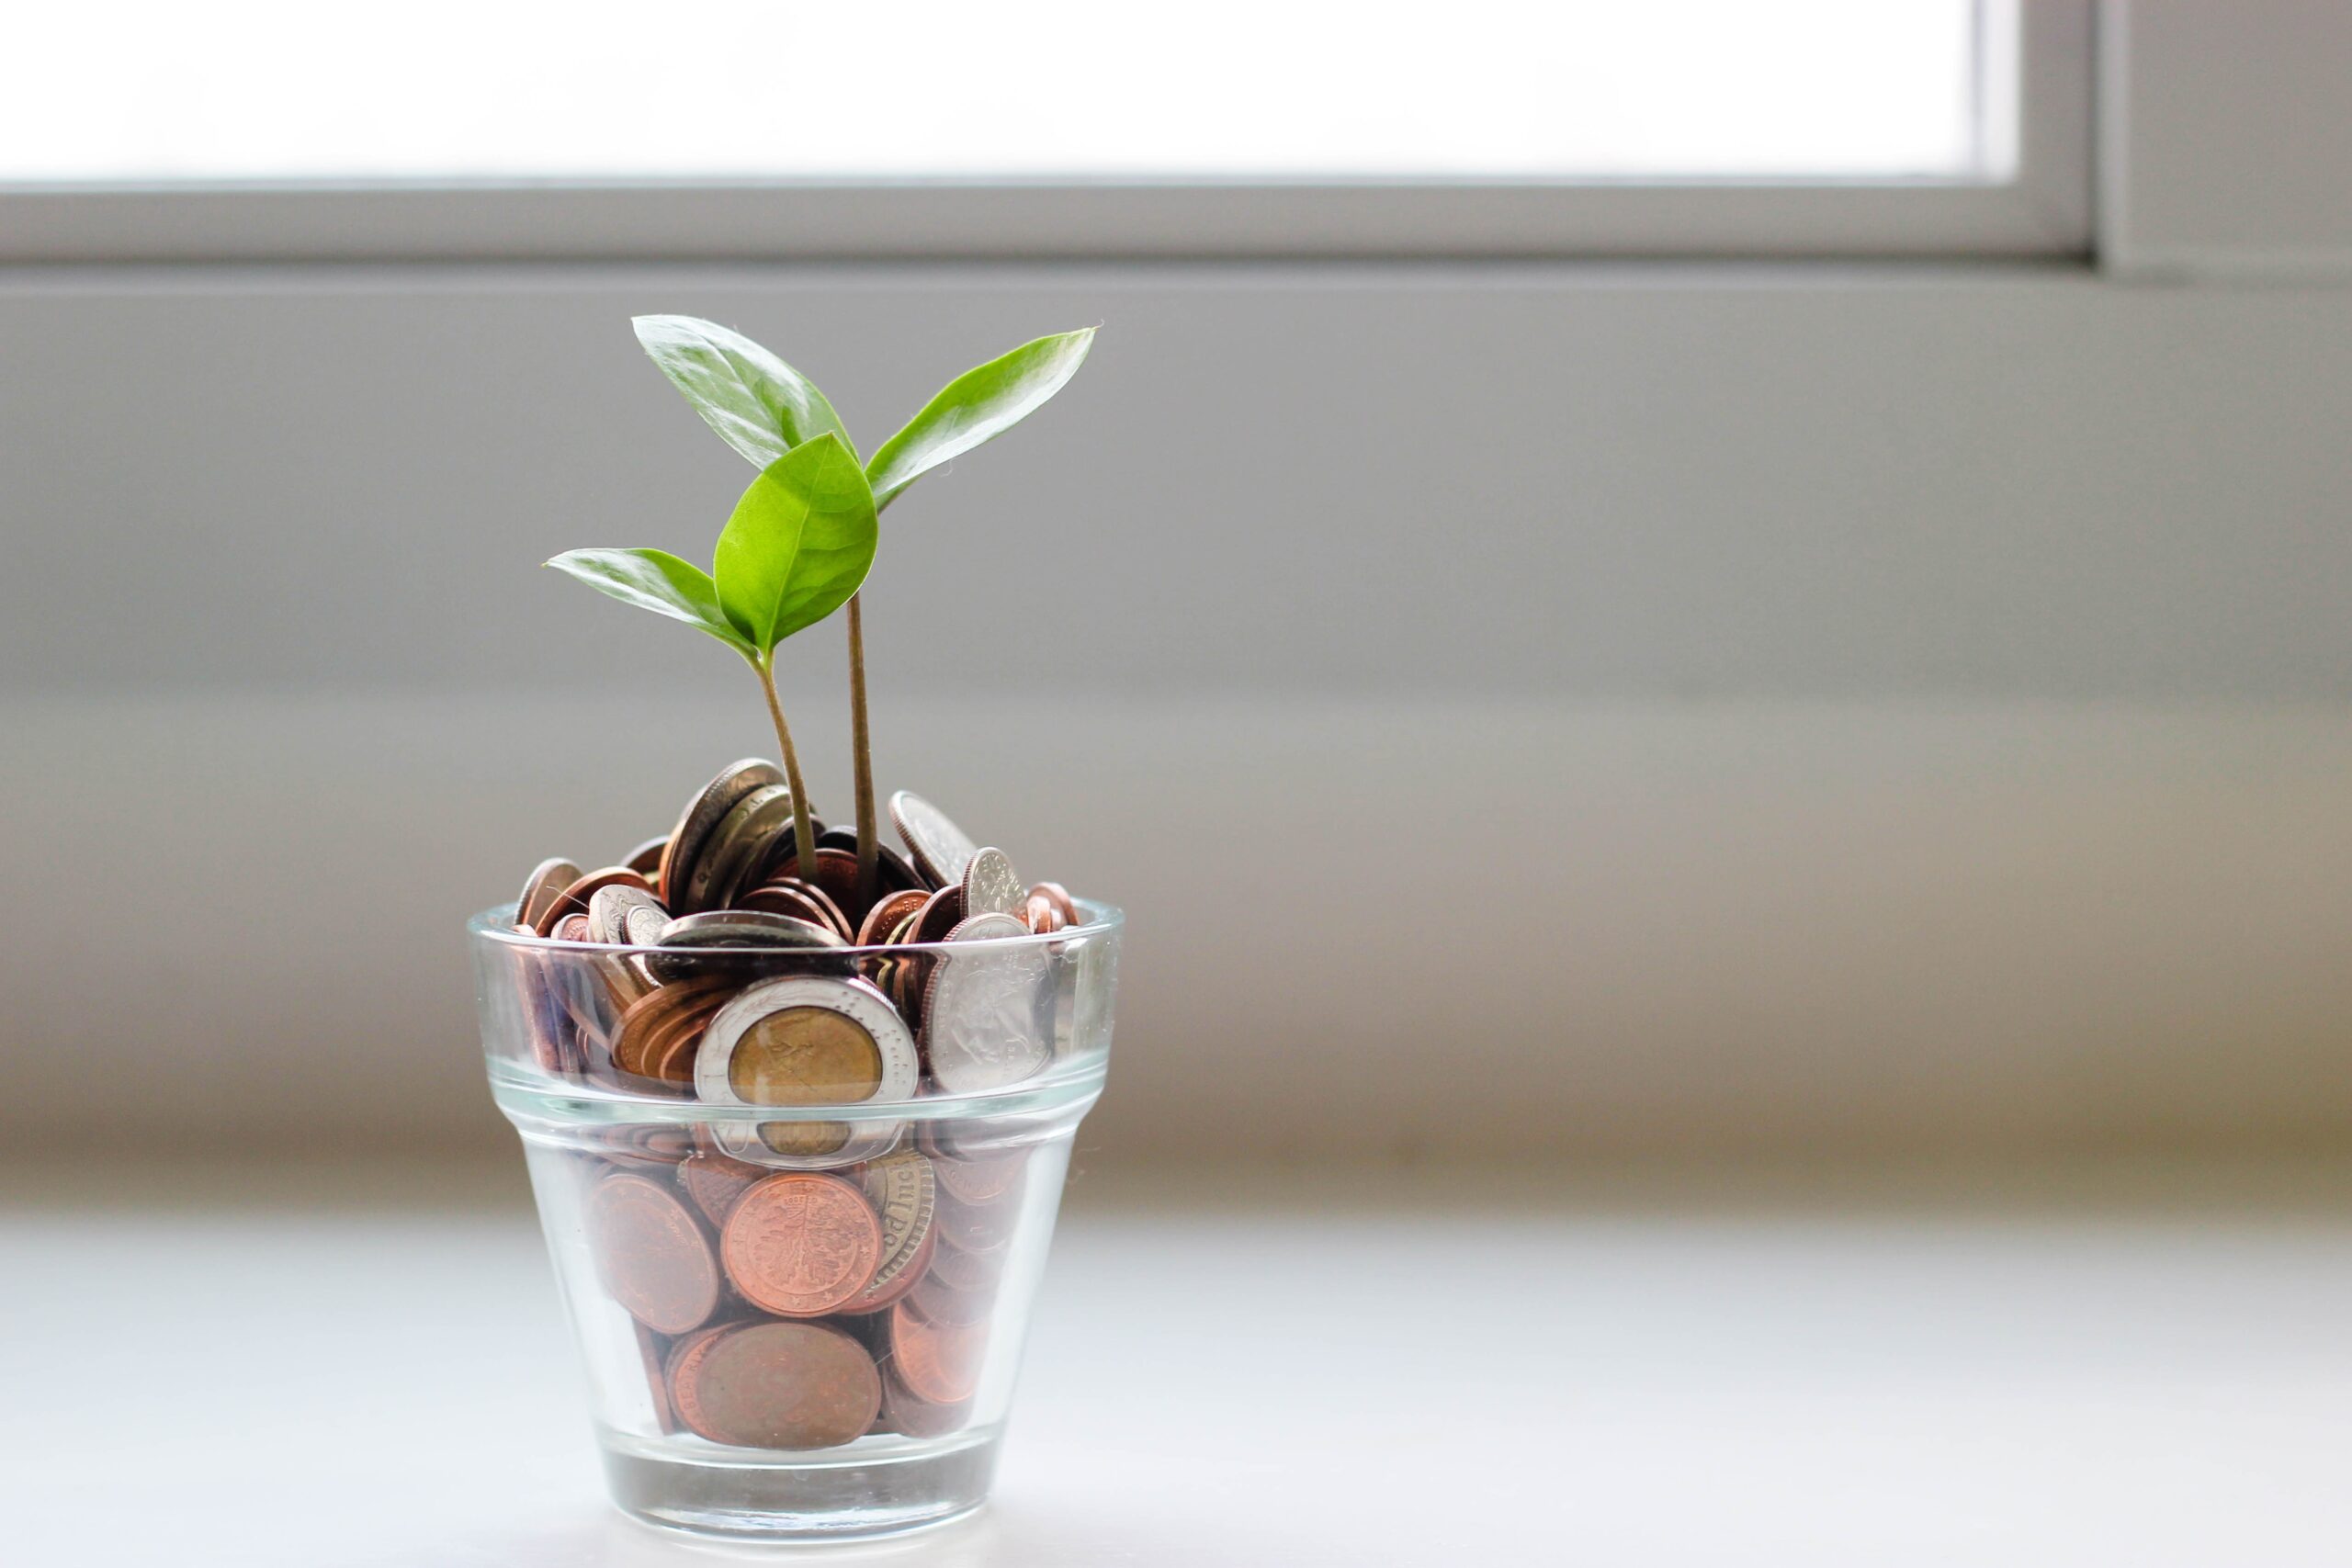 A green plant in a clear glass cup filled with coins.